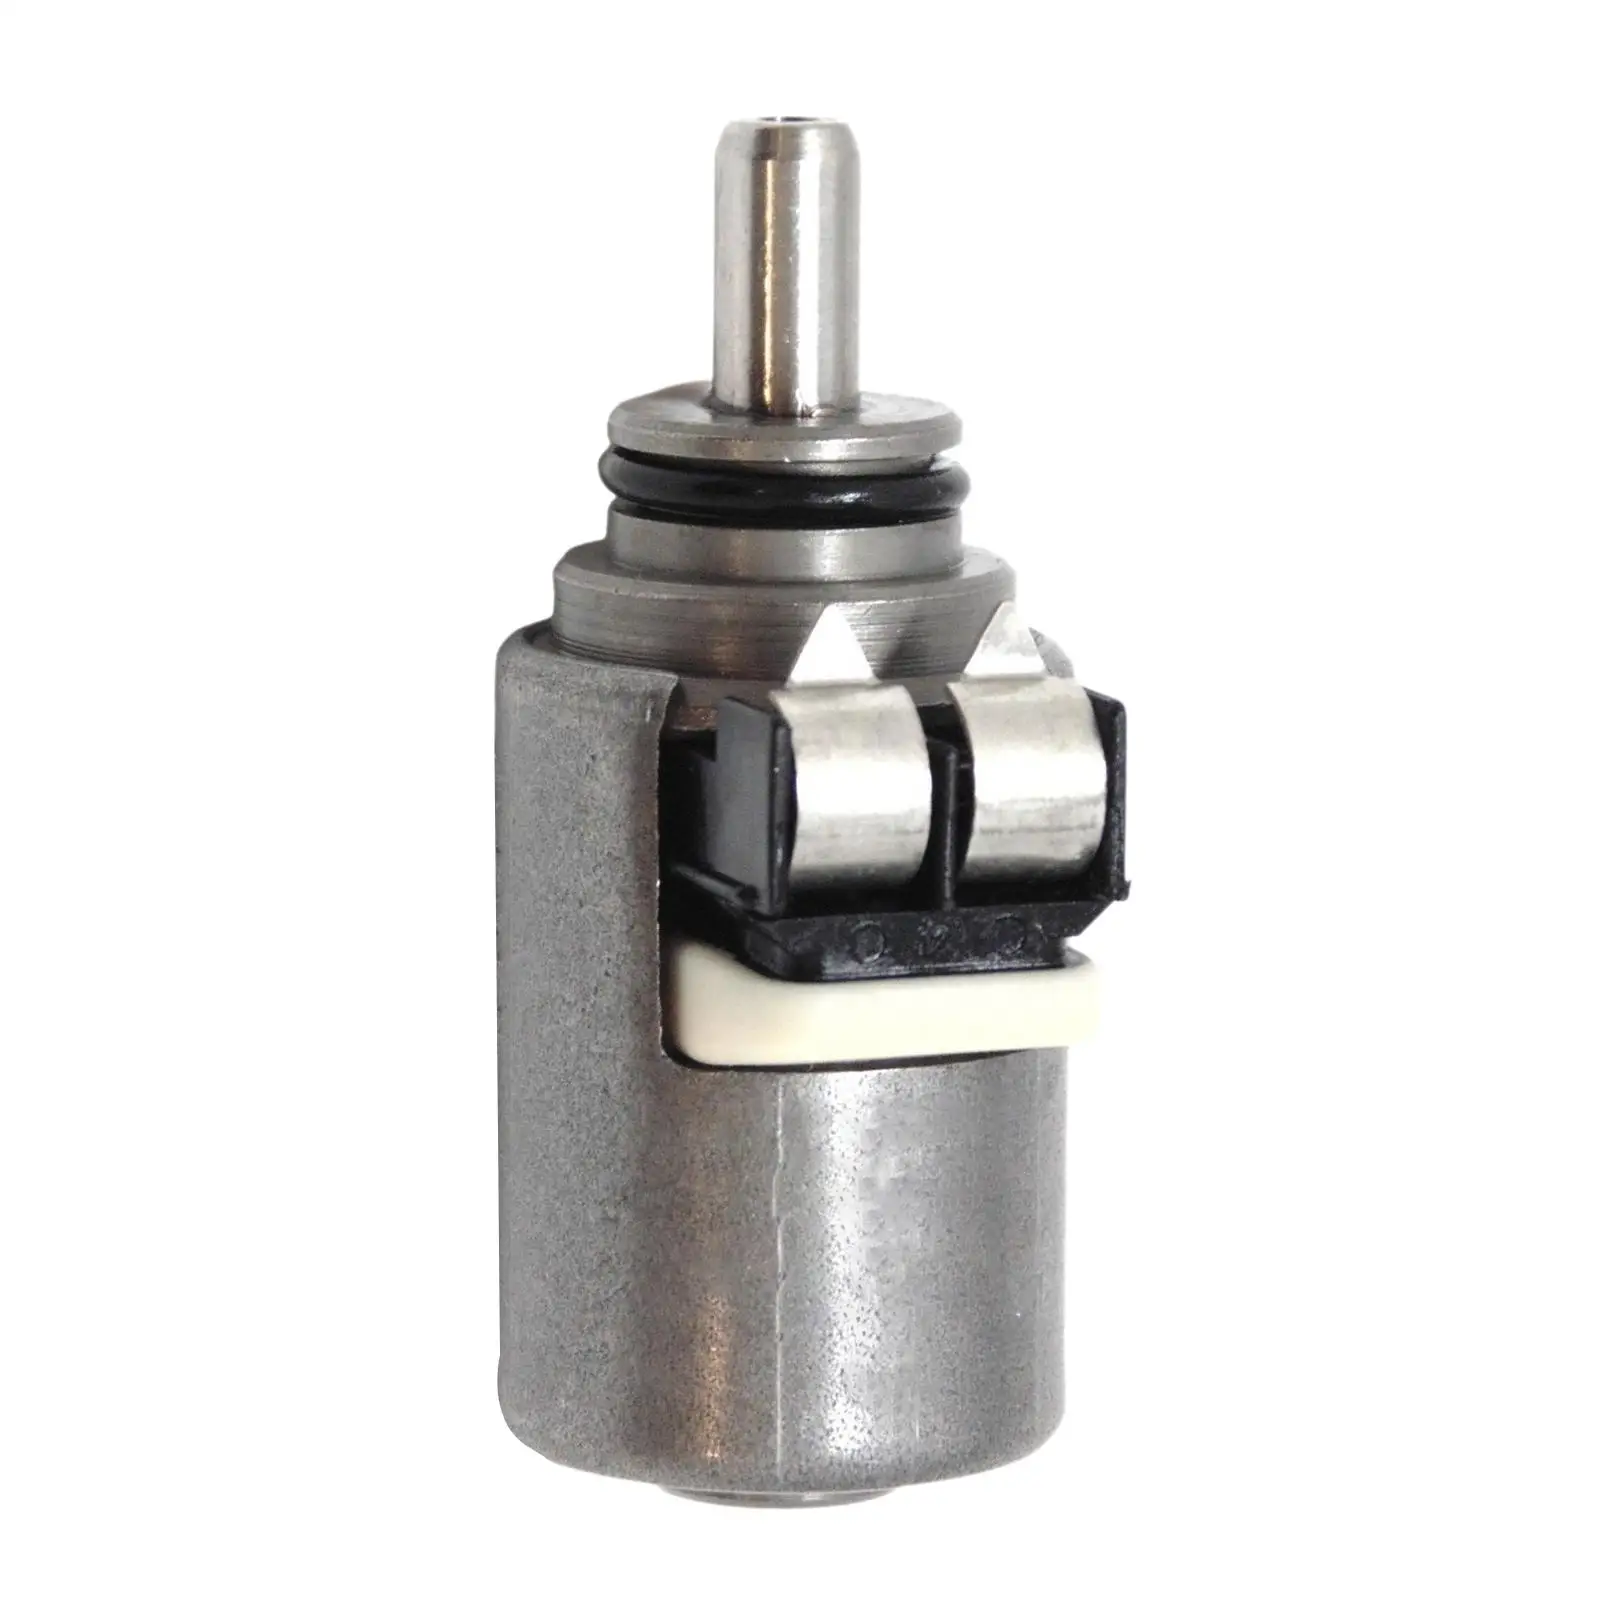 Transmission Valve Solenoid Professional Sturdy Easy to Install Direct Replaces